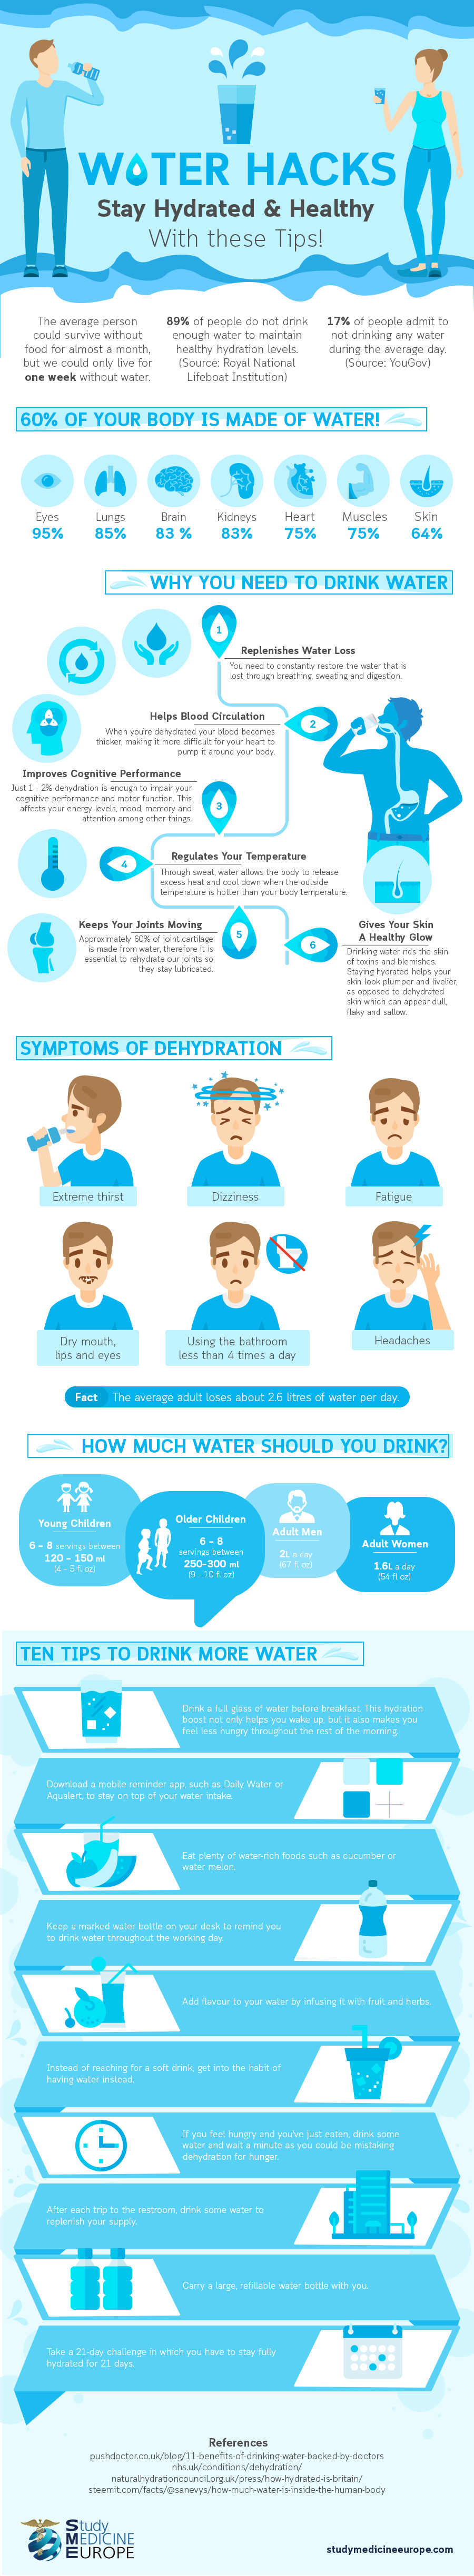 Water Hacks: Stay Hydrated & Healthy With these Tips!